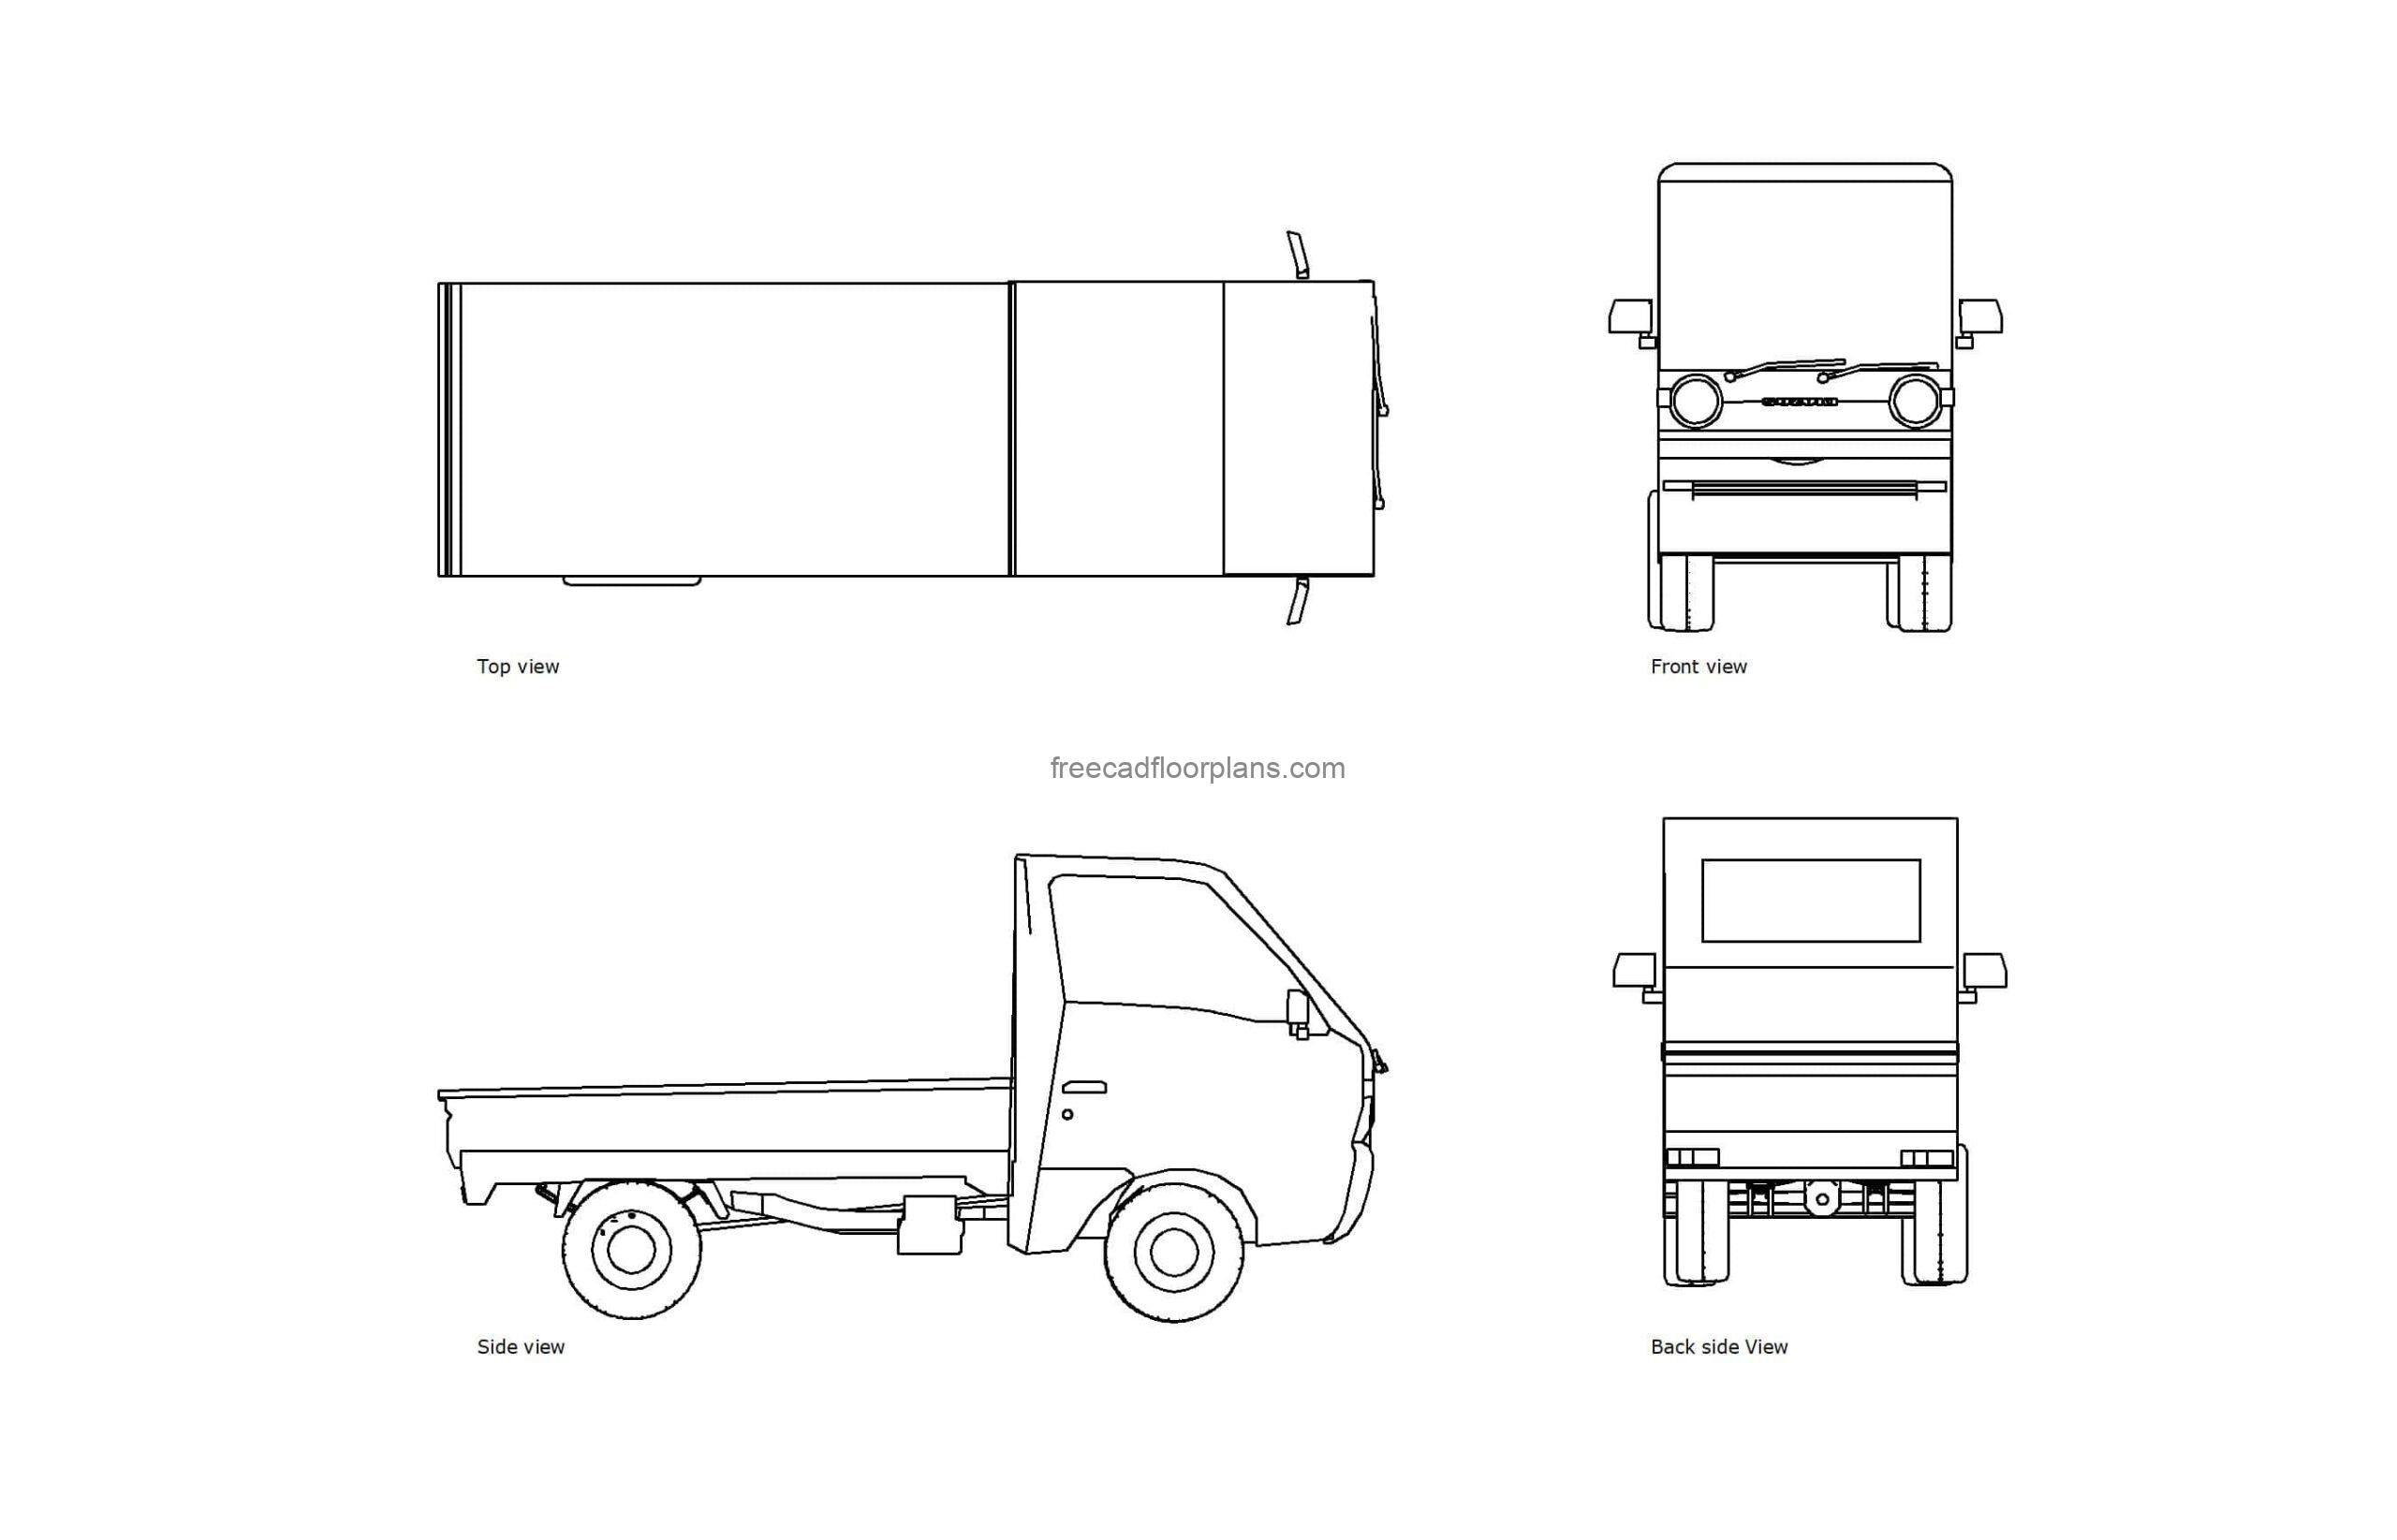 autocad drawing of a mini truck plan and elevation 2d views dwg file free for download